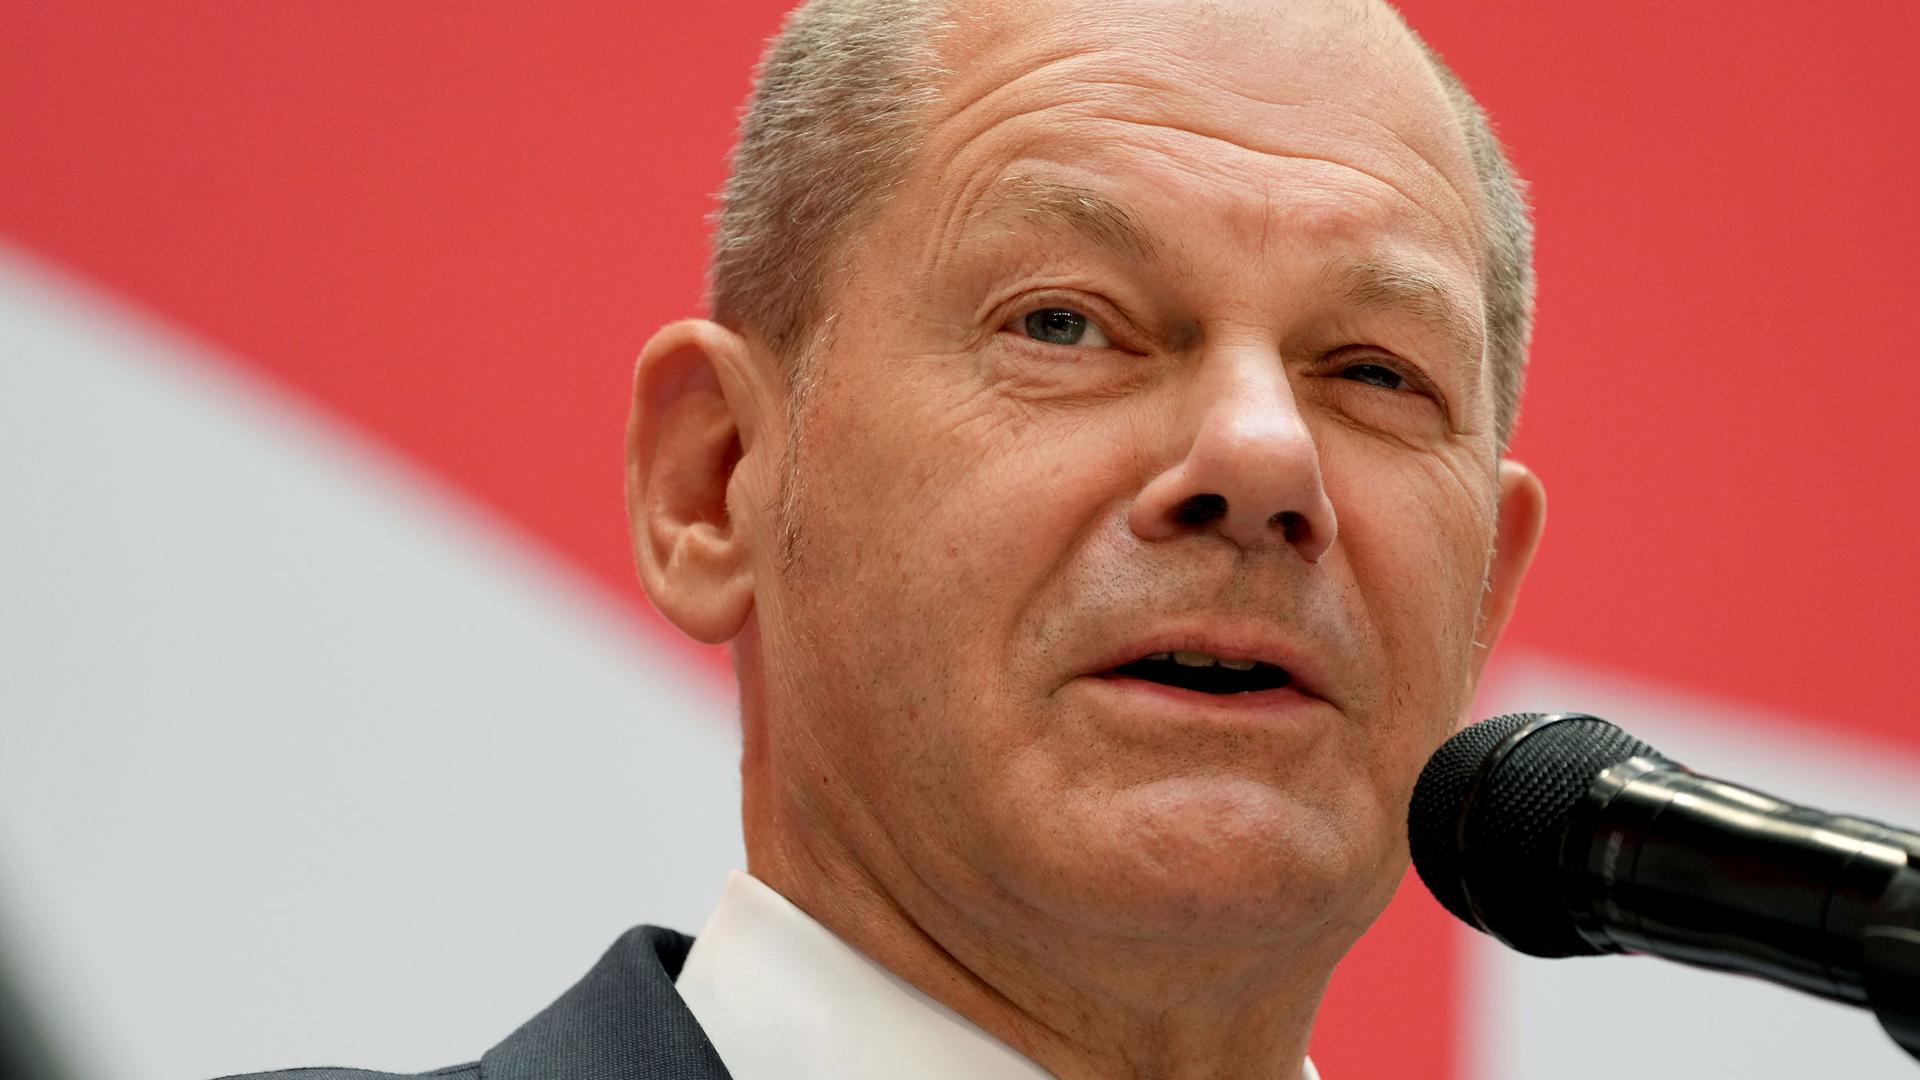 Olaf Scholz is shown in a close-up photoographer standing behind a microphone.